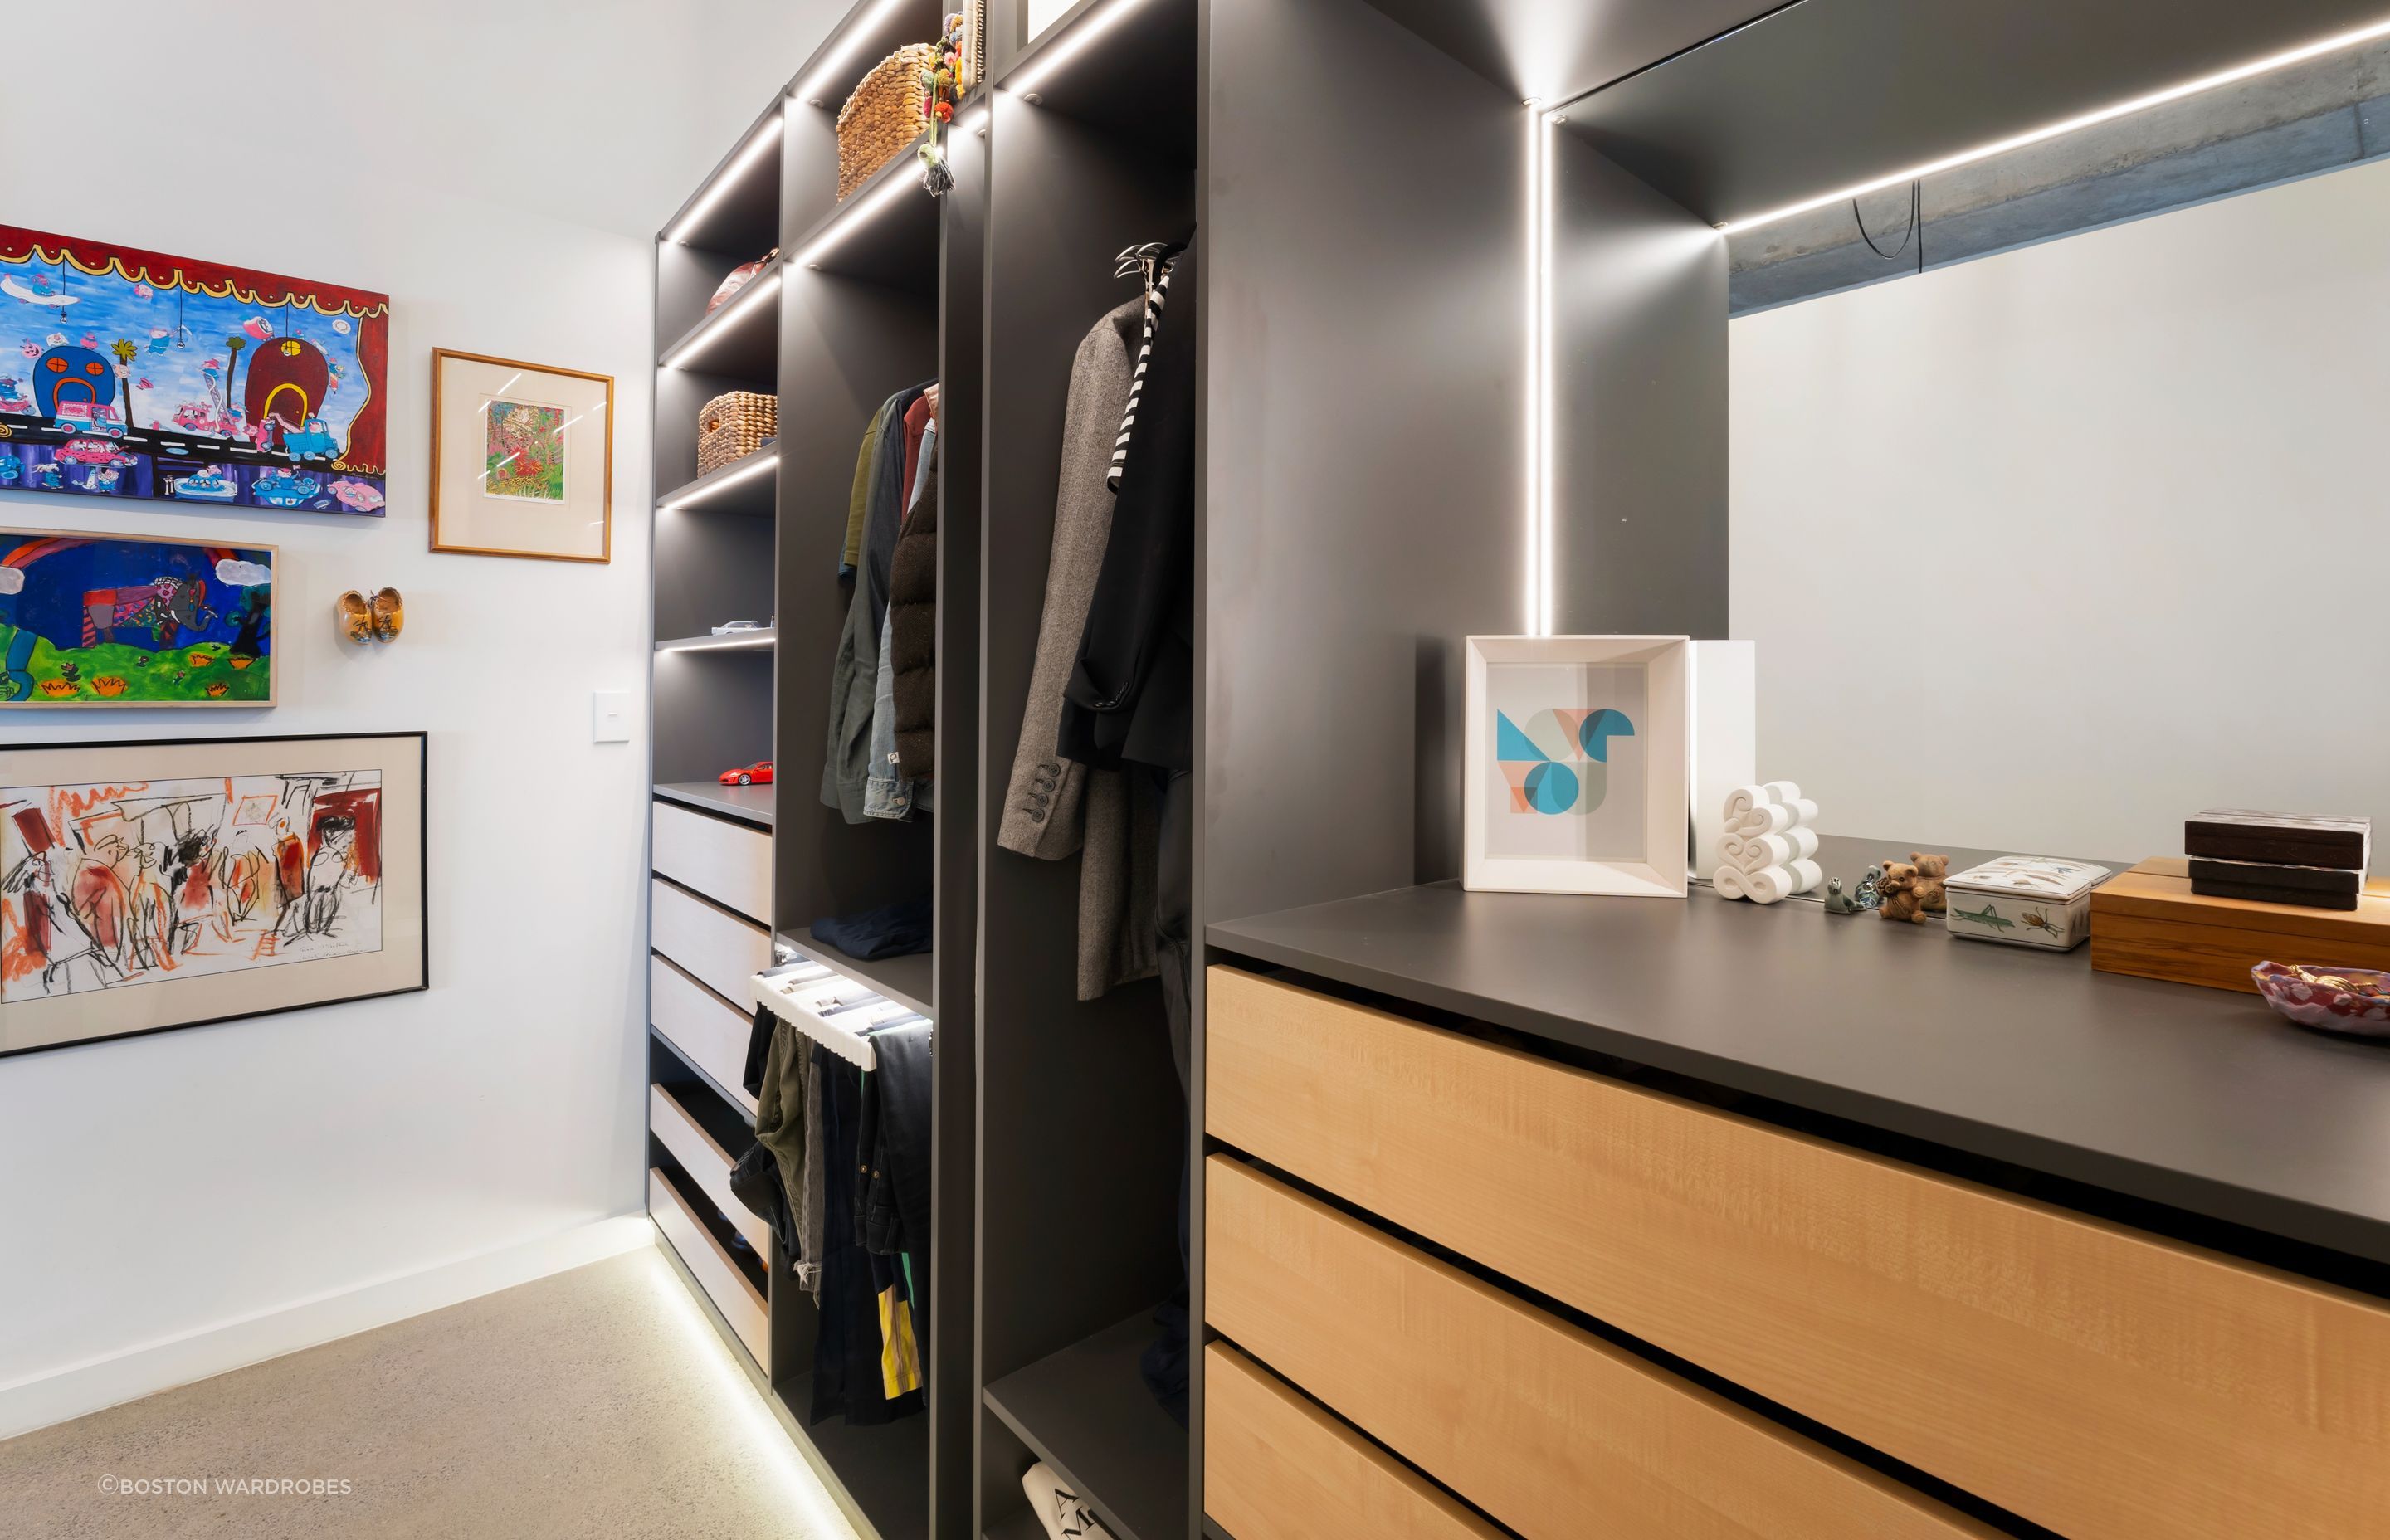 The design is informed by your storage needs, available space, lighting, and aesthetic preference.